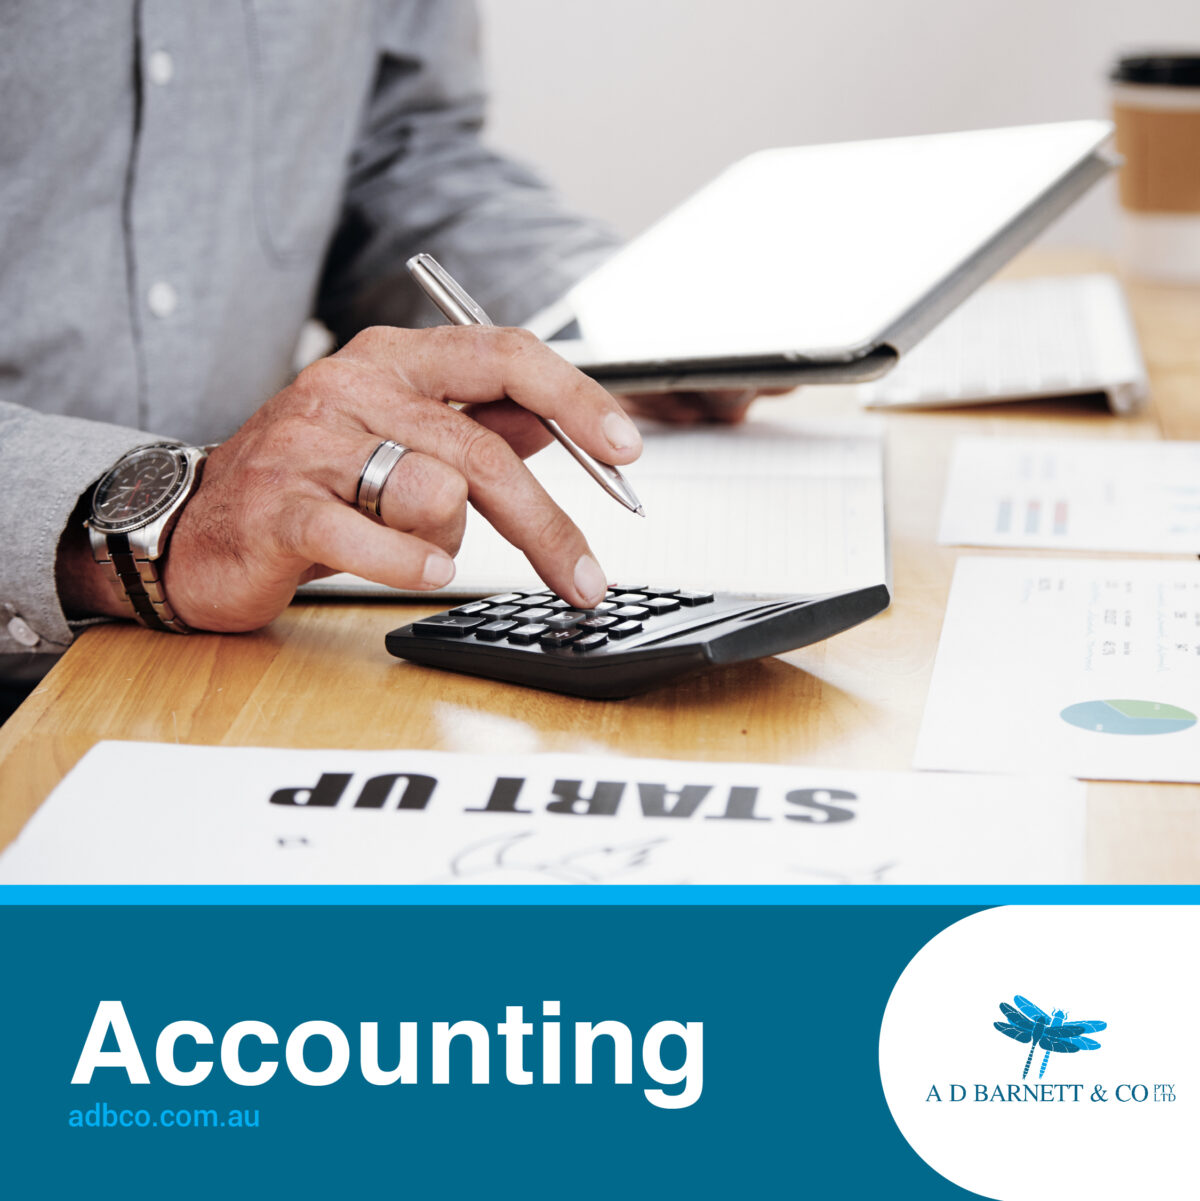 Castle hill accounting services